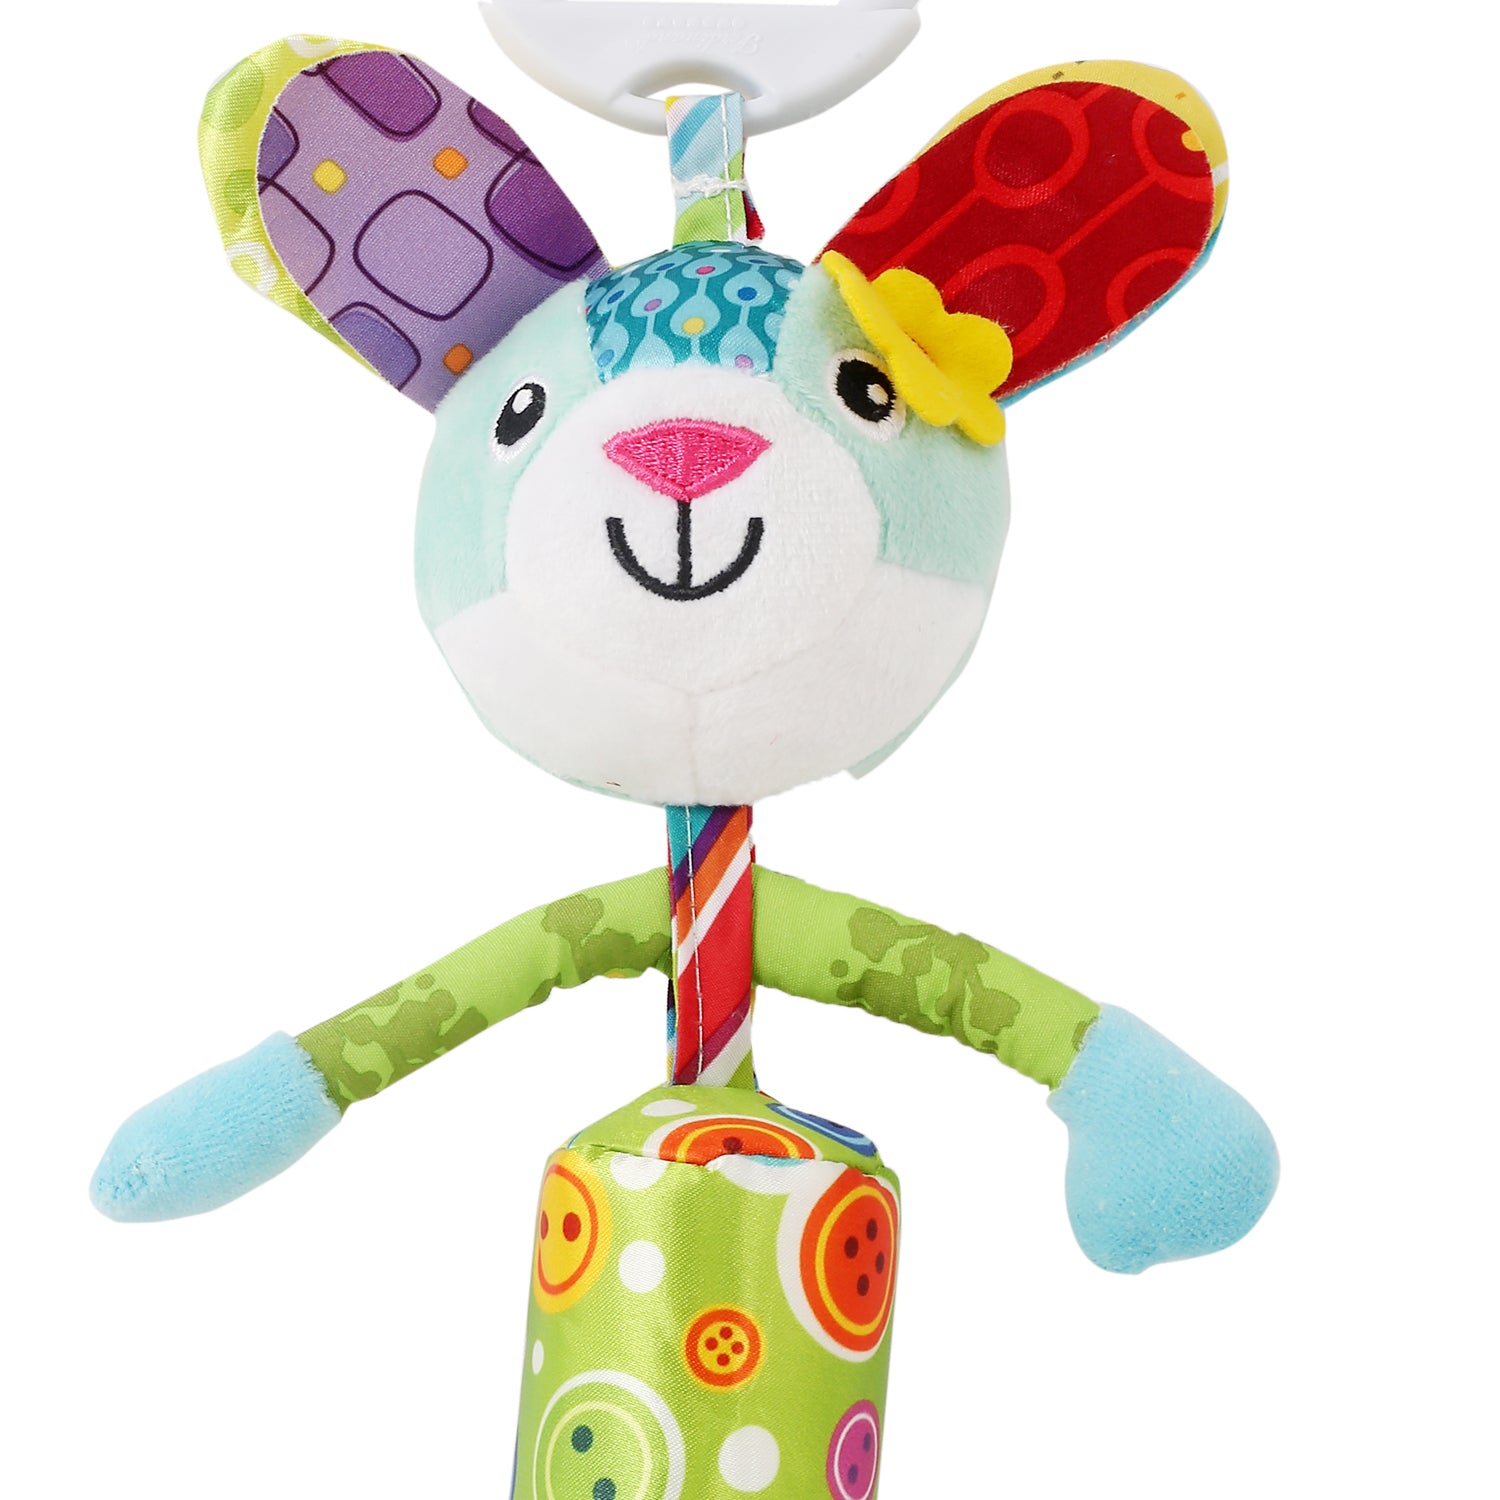 Mr. Flourist Green Hanging Musical Toy / Wind Chime Soft Rattle - Baby Moo